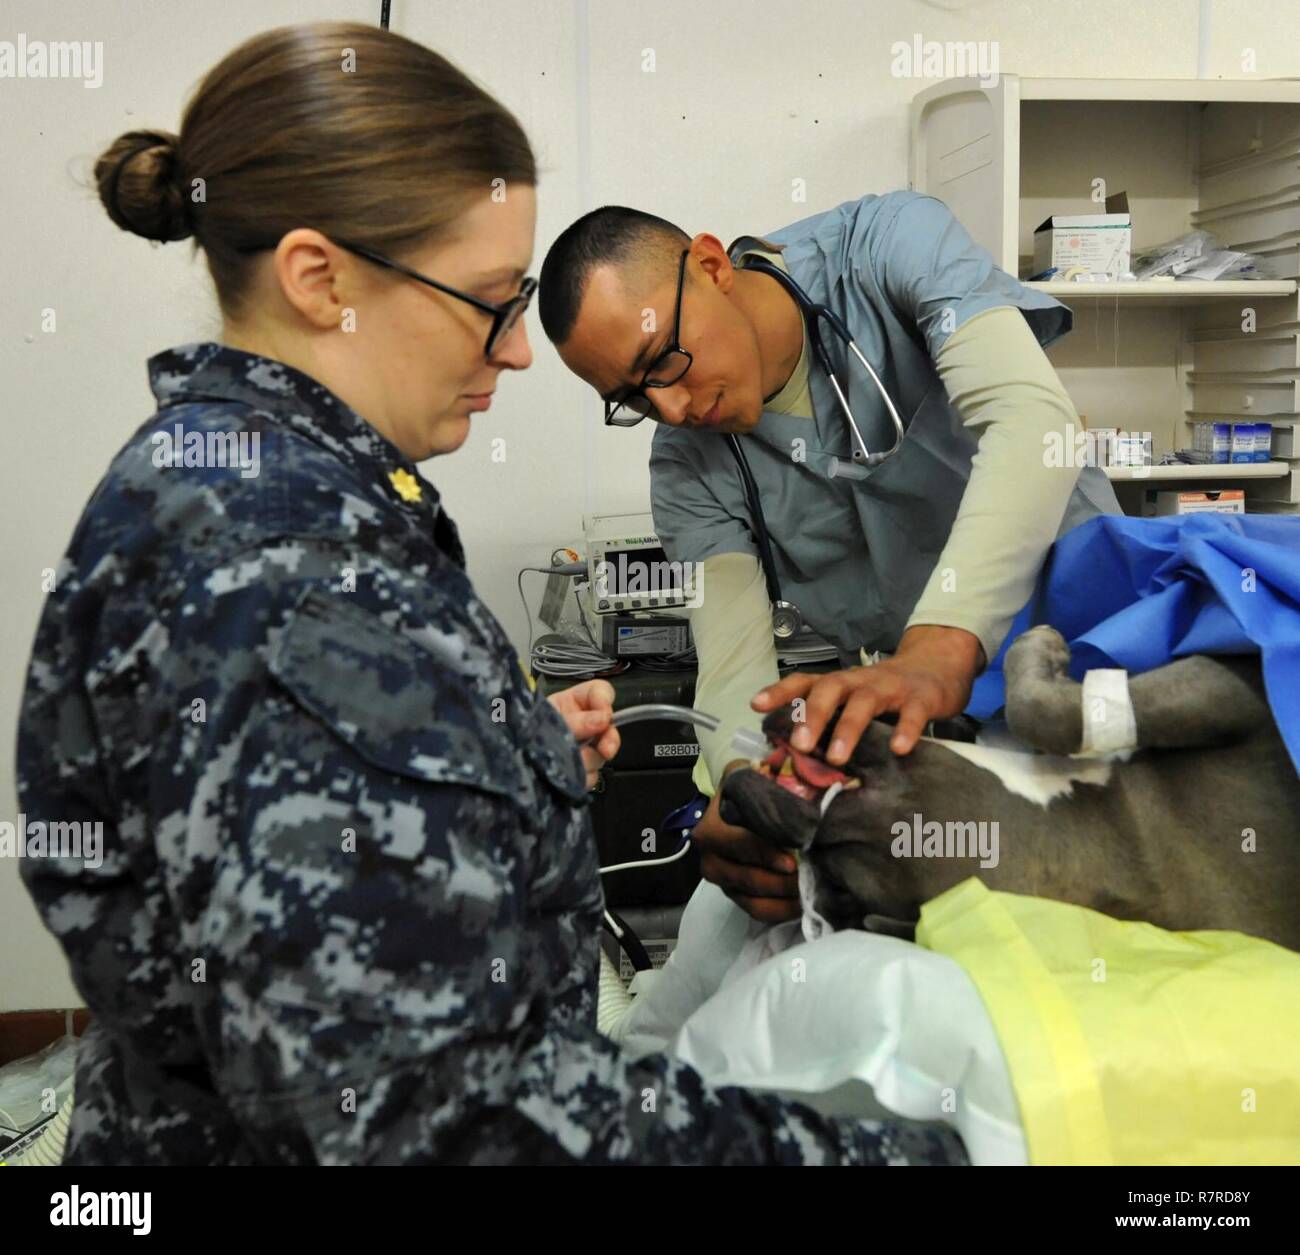 Navy Lt. Cmdr. Megan Debus, assistant officer in charge of the Kodiak Clinic and Army Veterinary Technician Specialist Edwardo Macias with the 109th Veterinary Services Medical Detachment assists in the spay surgery of a dog on March 31, 2017 on Kodiak Island, Alaska. ARCTIC CARE 2017 is an Office of Secretary of Defense sponsored, Air Force Reserve Command led, training event coordinated with Kodiak Area Native Association (KANA) and civil authorities in Kodiak, Alaska. Stock Photo